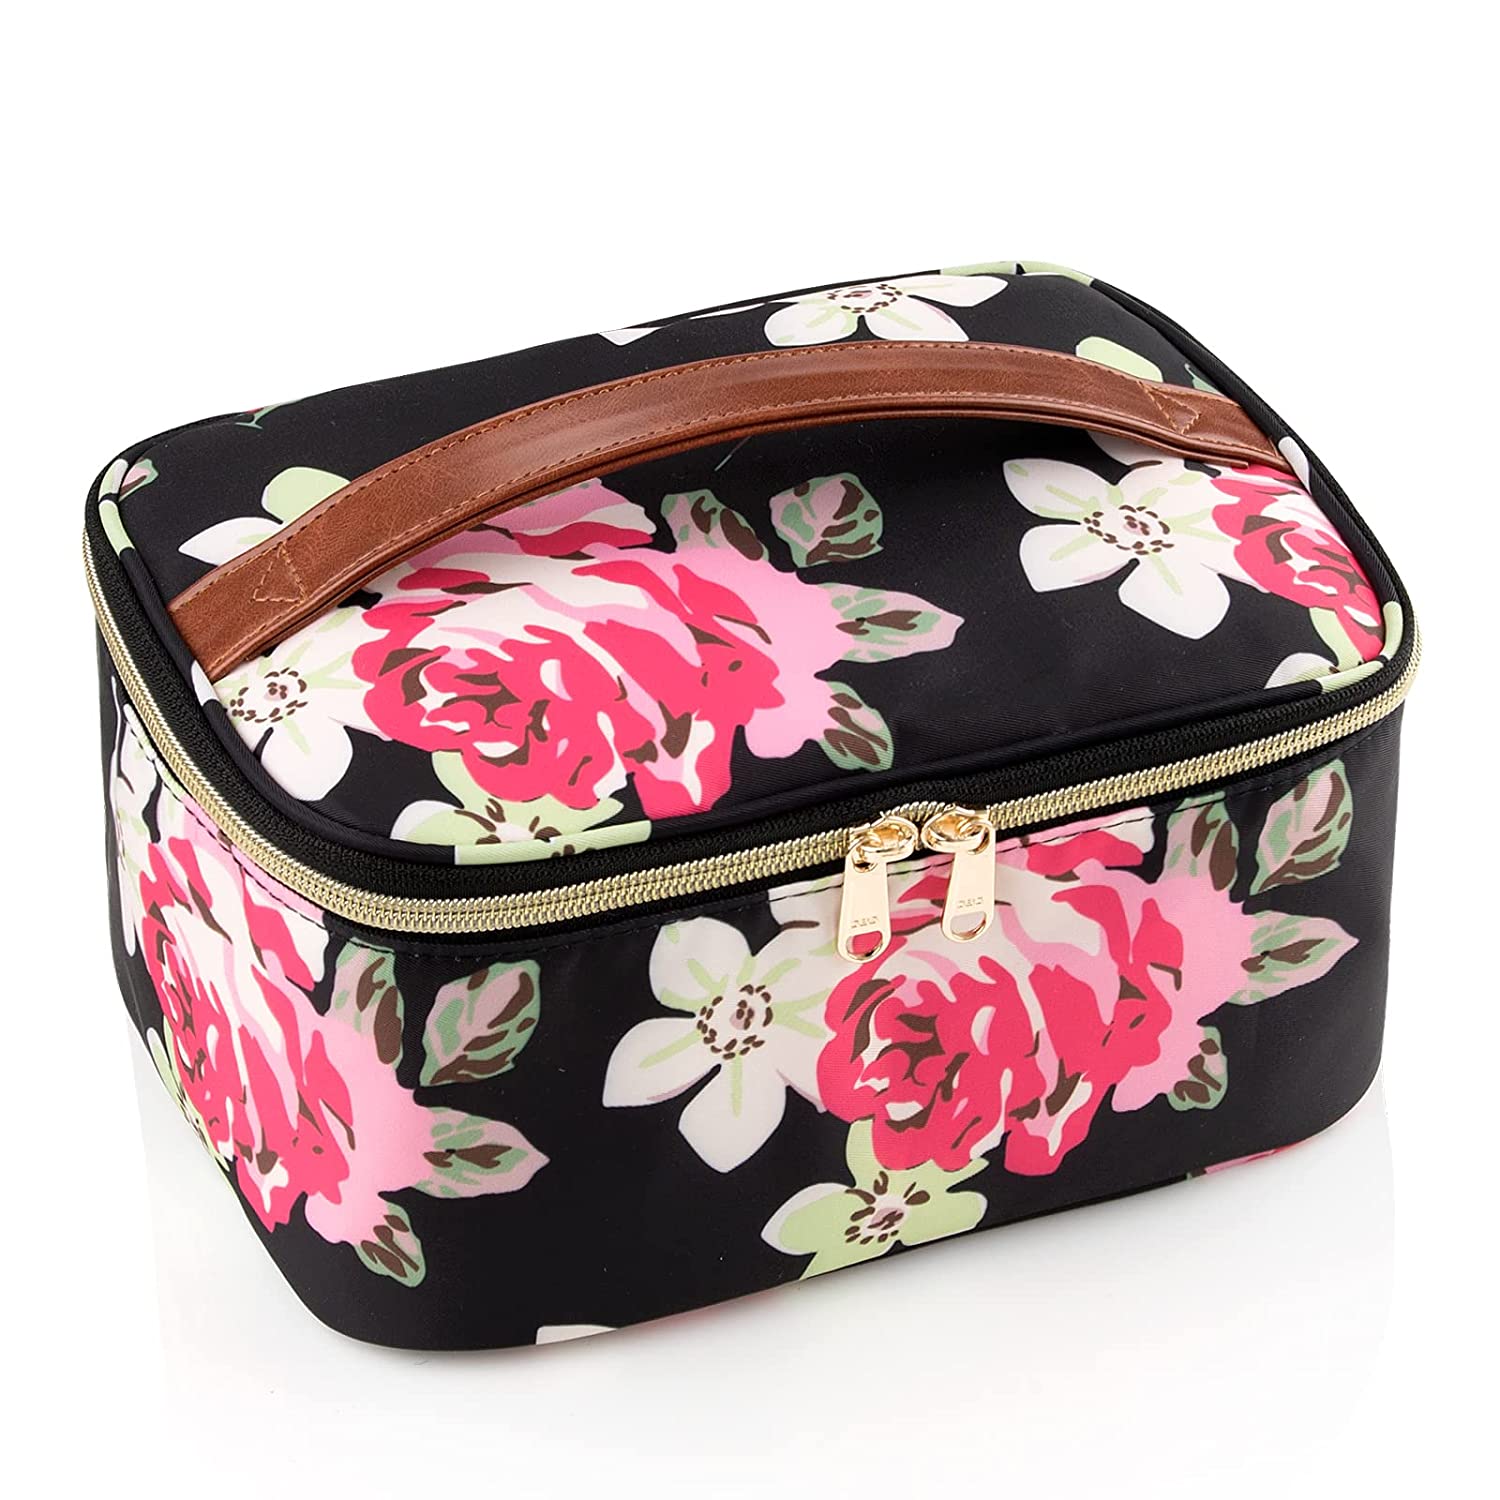 Large Portable Makeup Bag with Toiletries Brushes Slots and